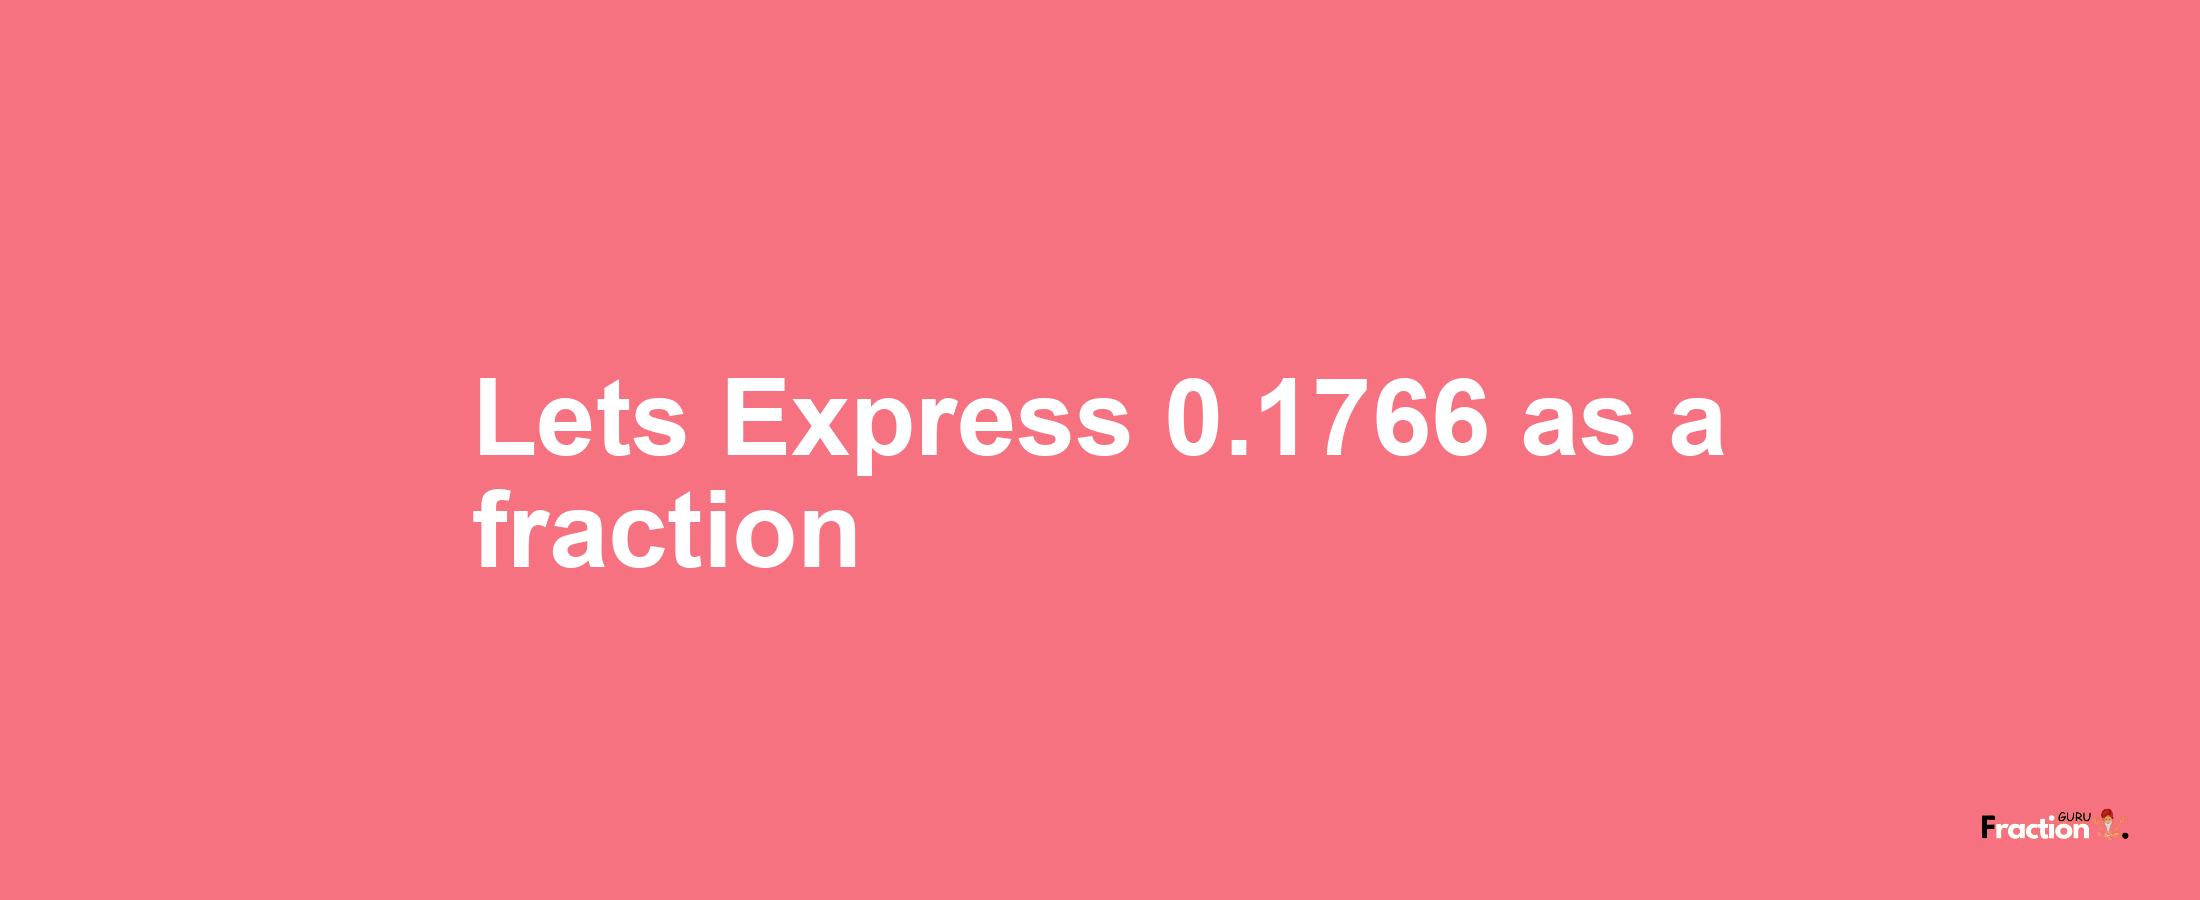 Lets Express 0.1766 as afraction